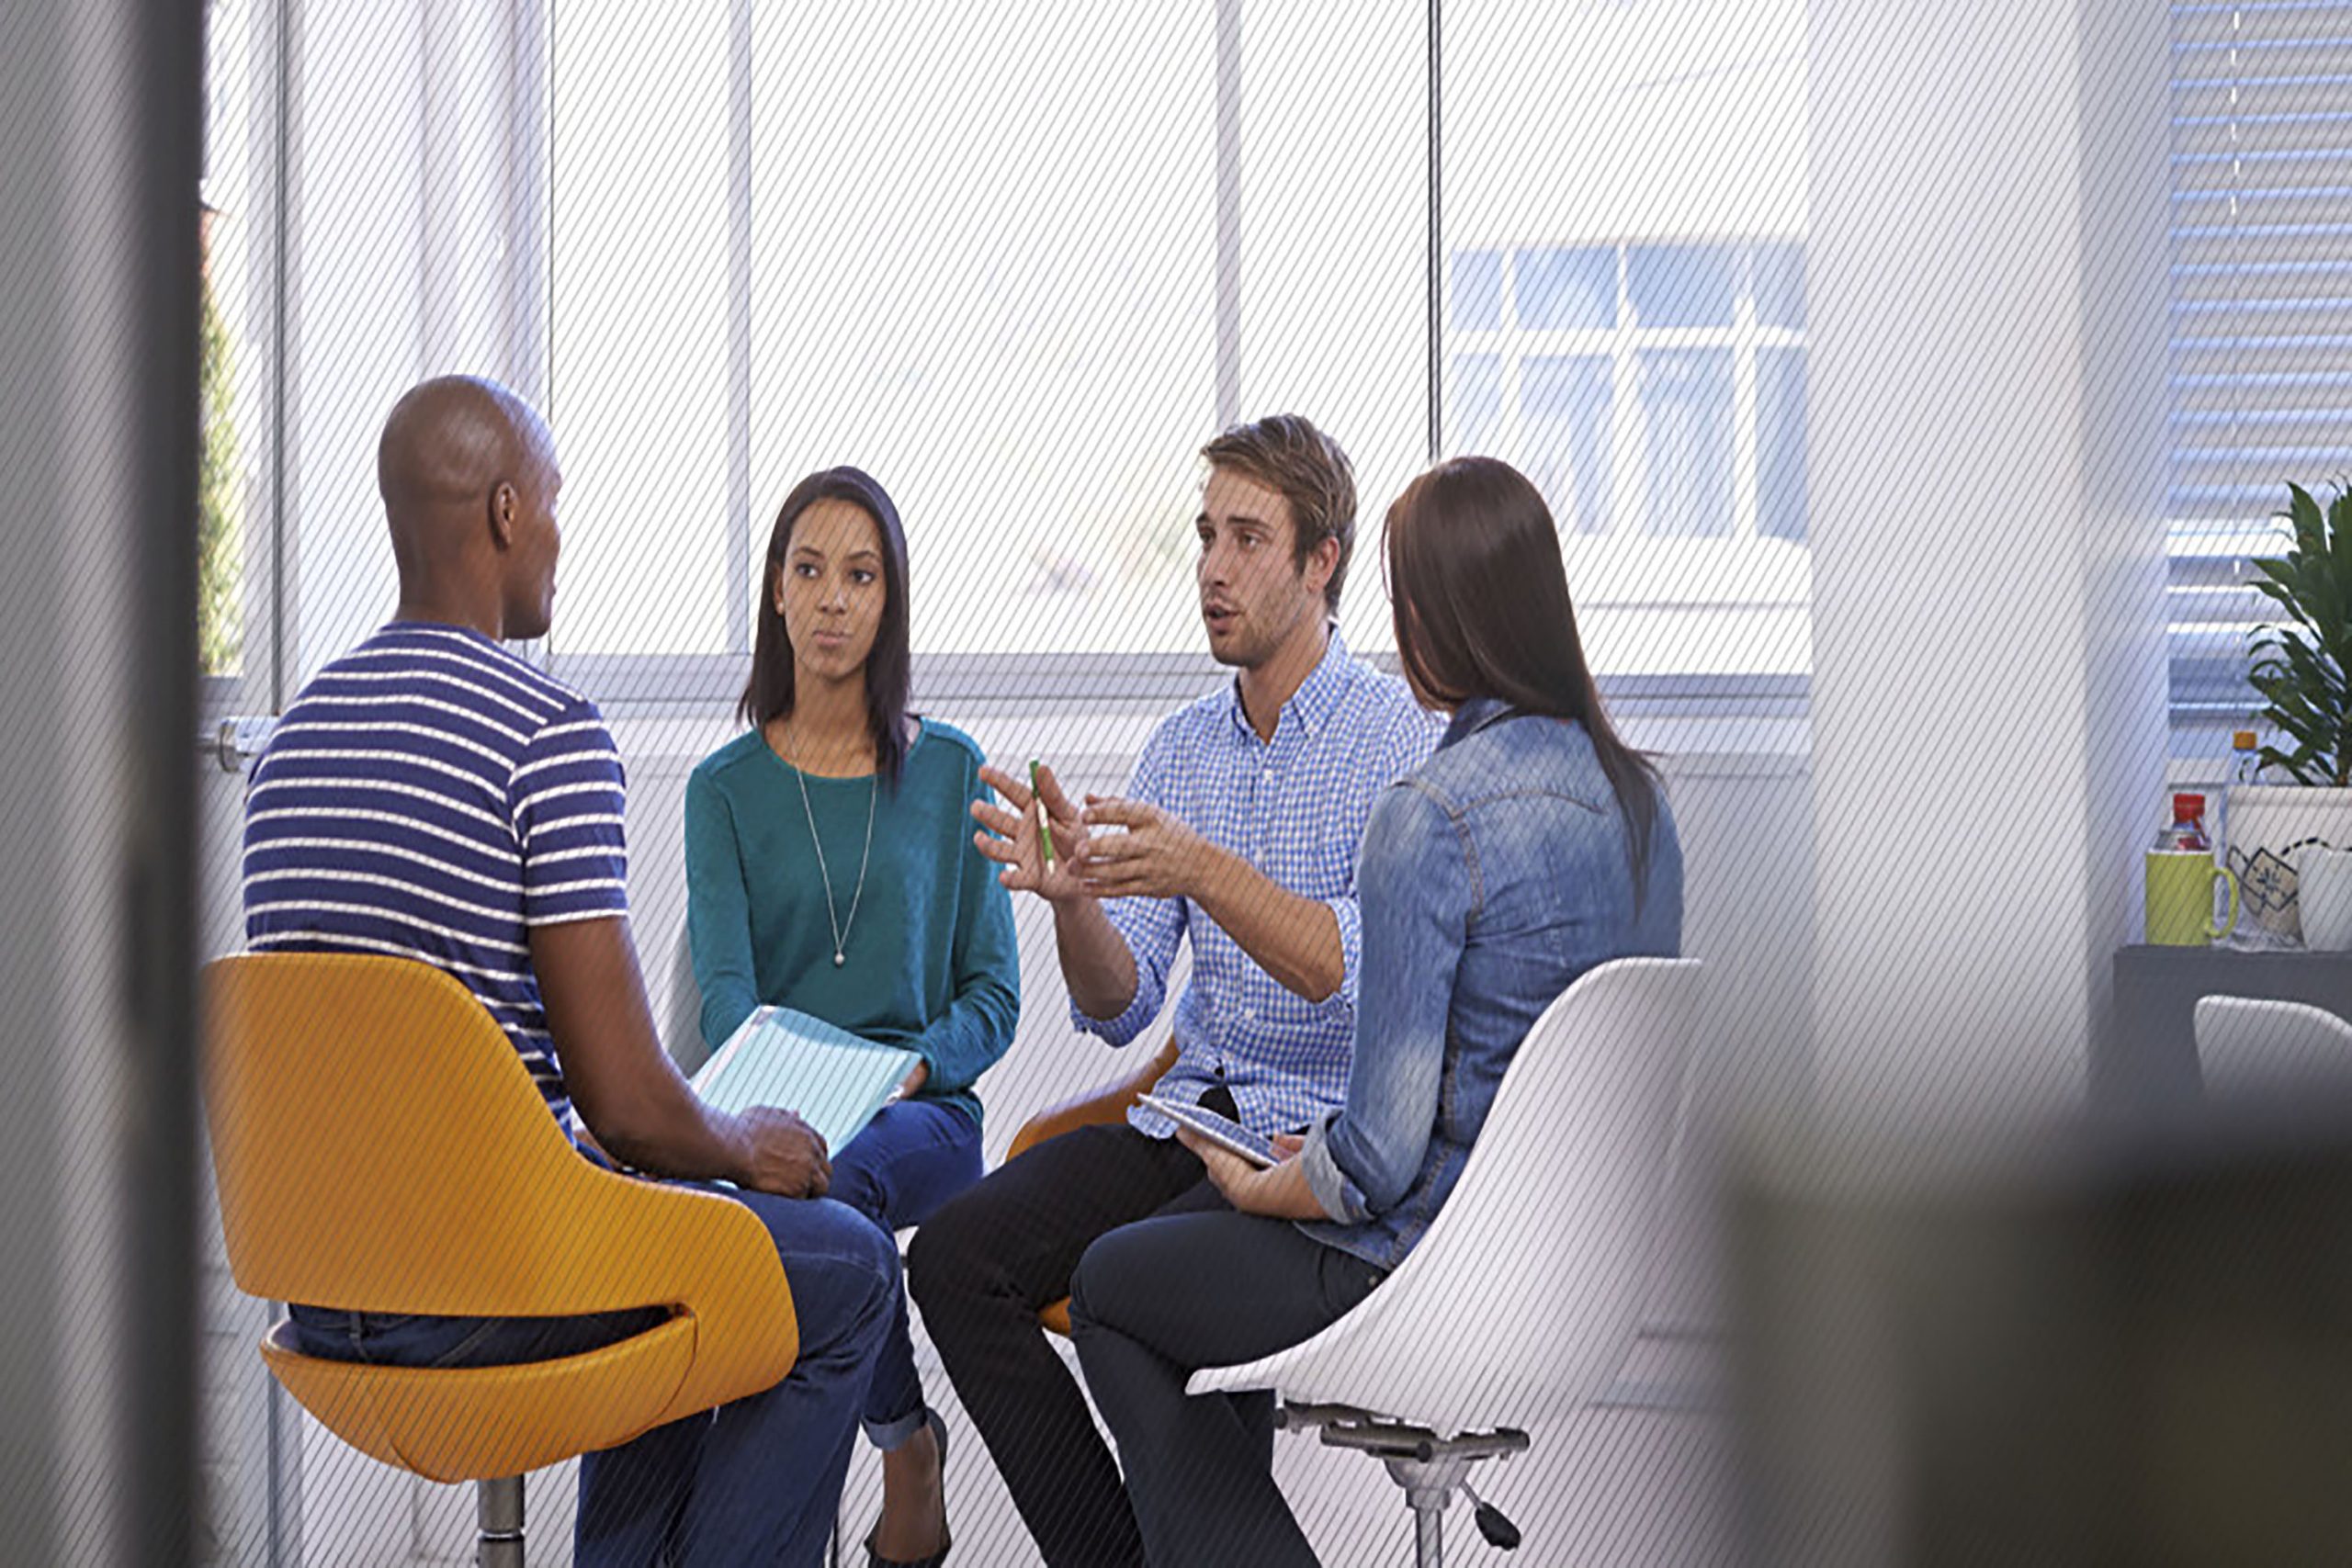 Featured image: A group of people sitting in a close circle in an office having a discussion   - Read full post: Why Quantitative Surveys Fall Short When it Comes to Customer Experience (CX)